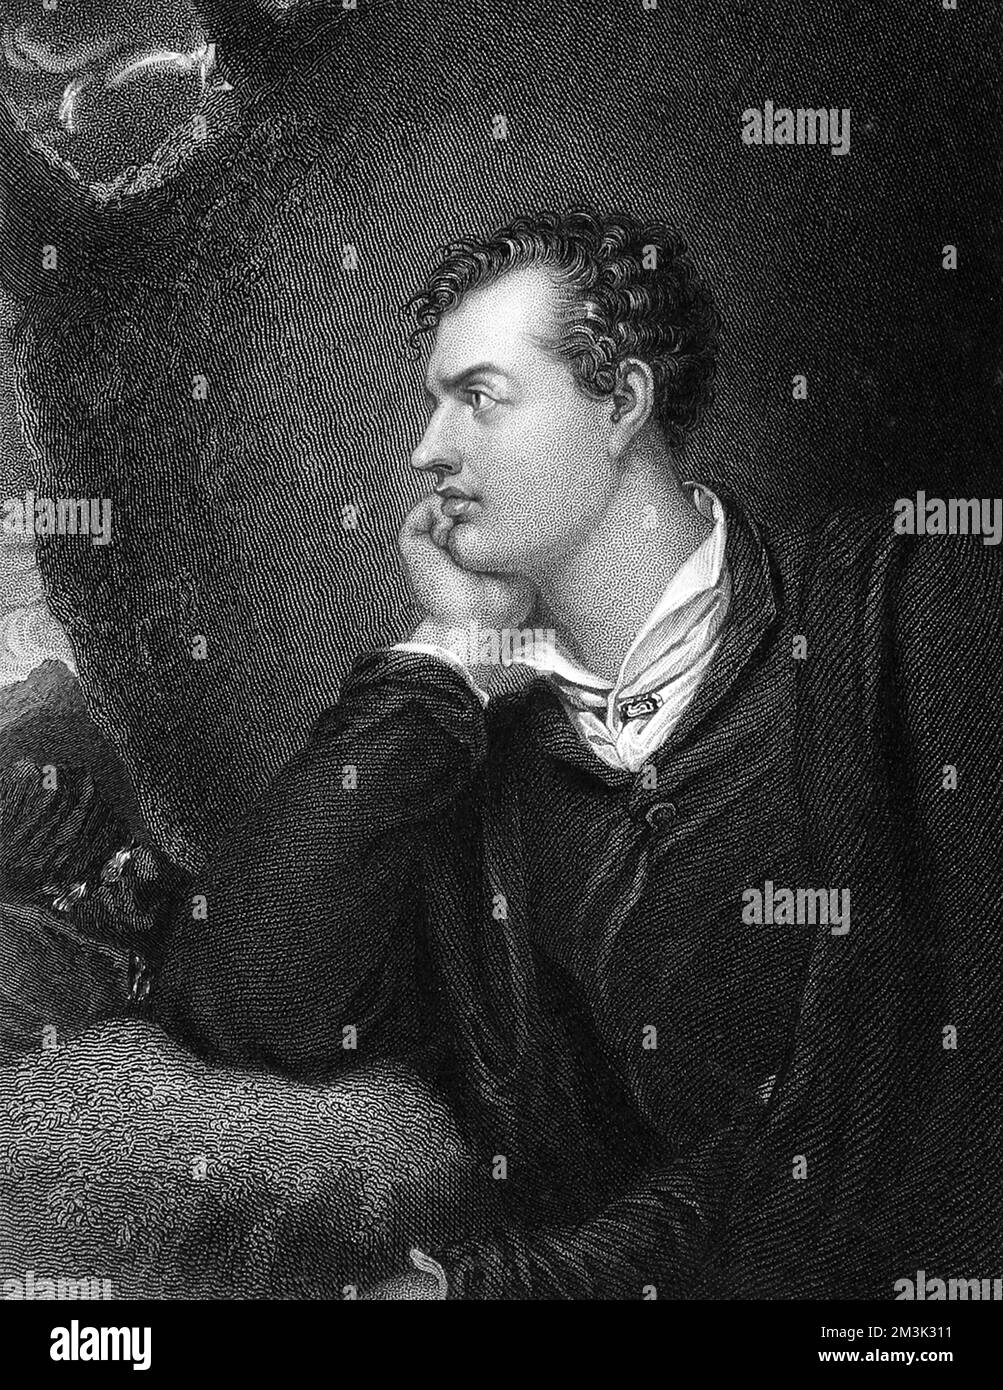 George Gordon, 6th Baron Byron of Rochdale (1788 - 1824), better known as Lord Byron, the English poet.  1829 Stock Photo